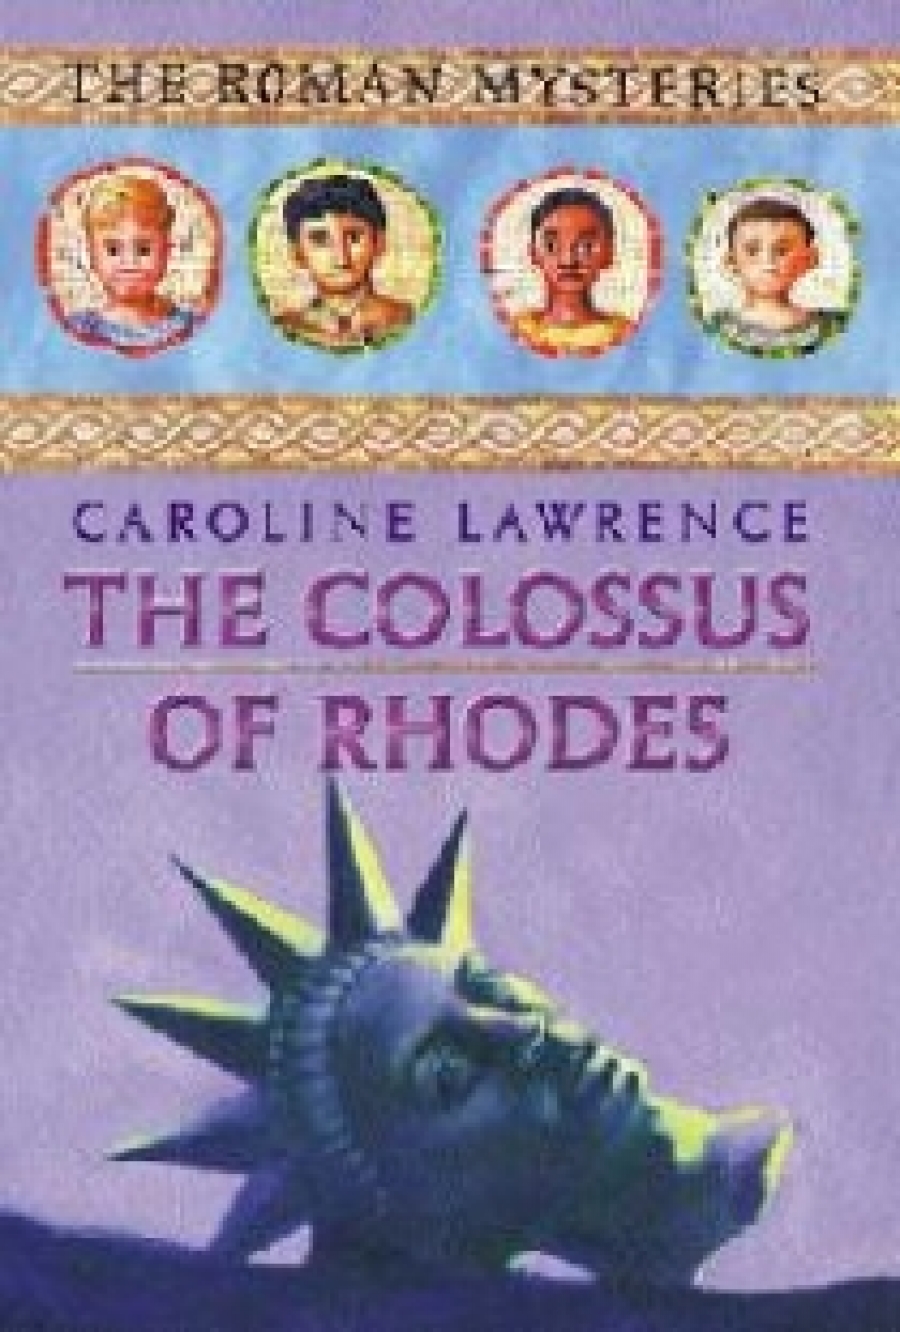 Lawrence, Caroline The Colossus of rhodes  (The Roman Mysteries) 